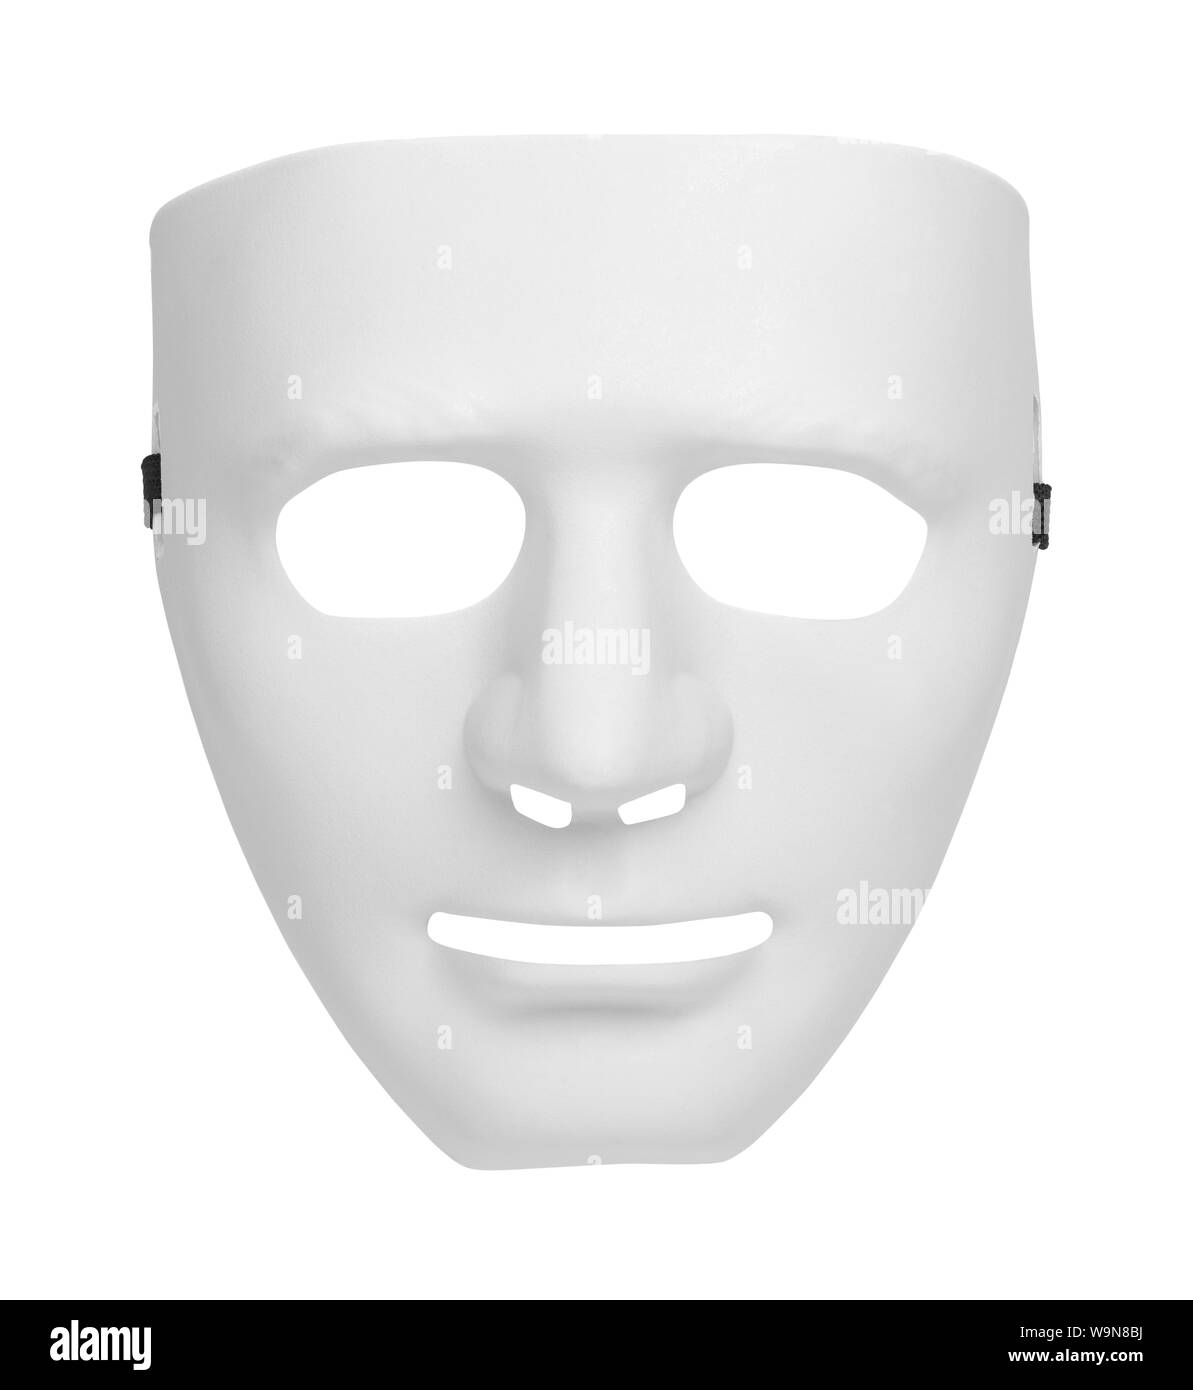 White Theater Mask Isolated on a White Background. Stock Photo